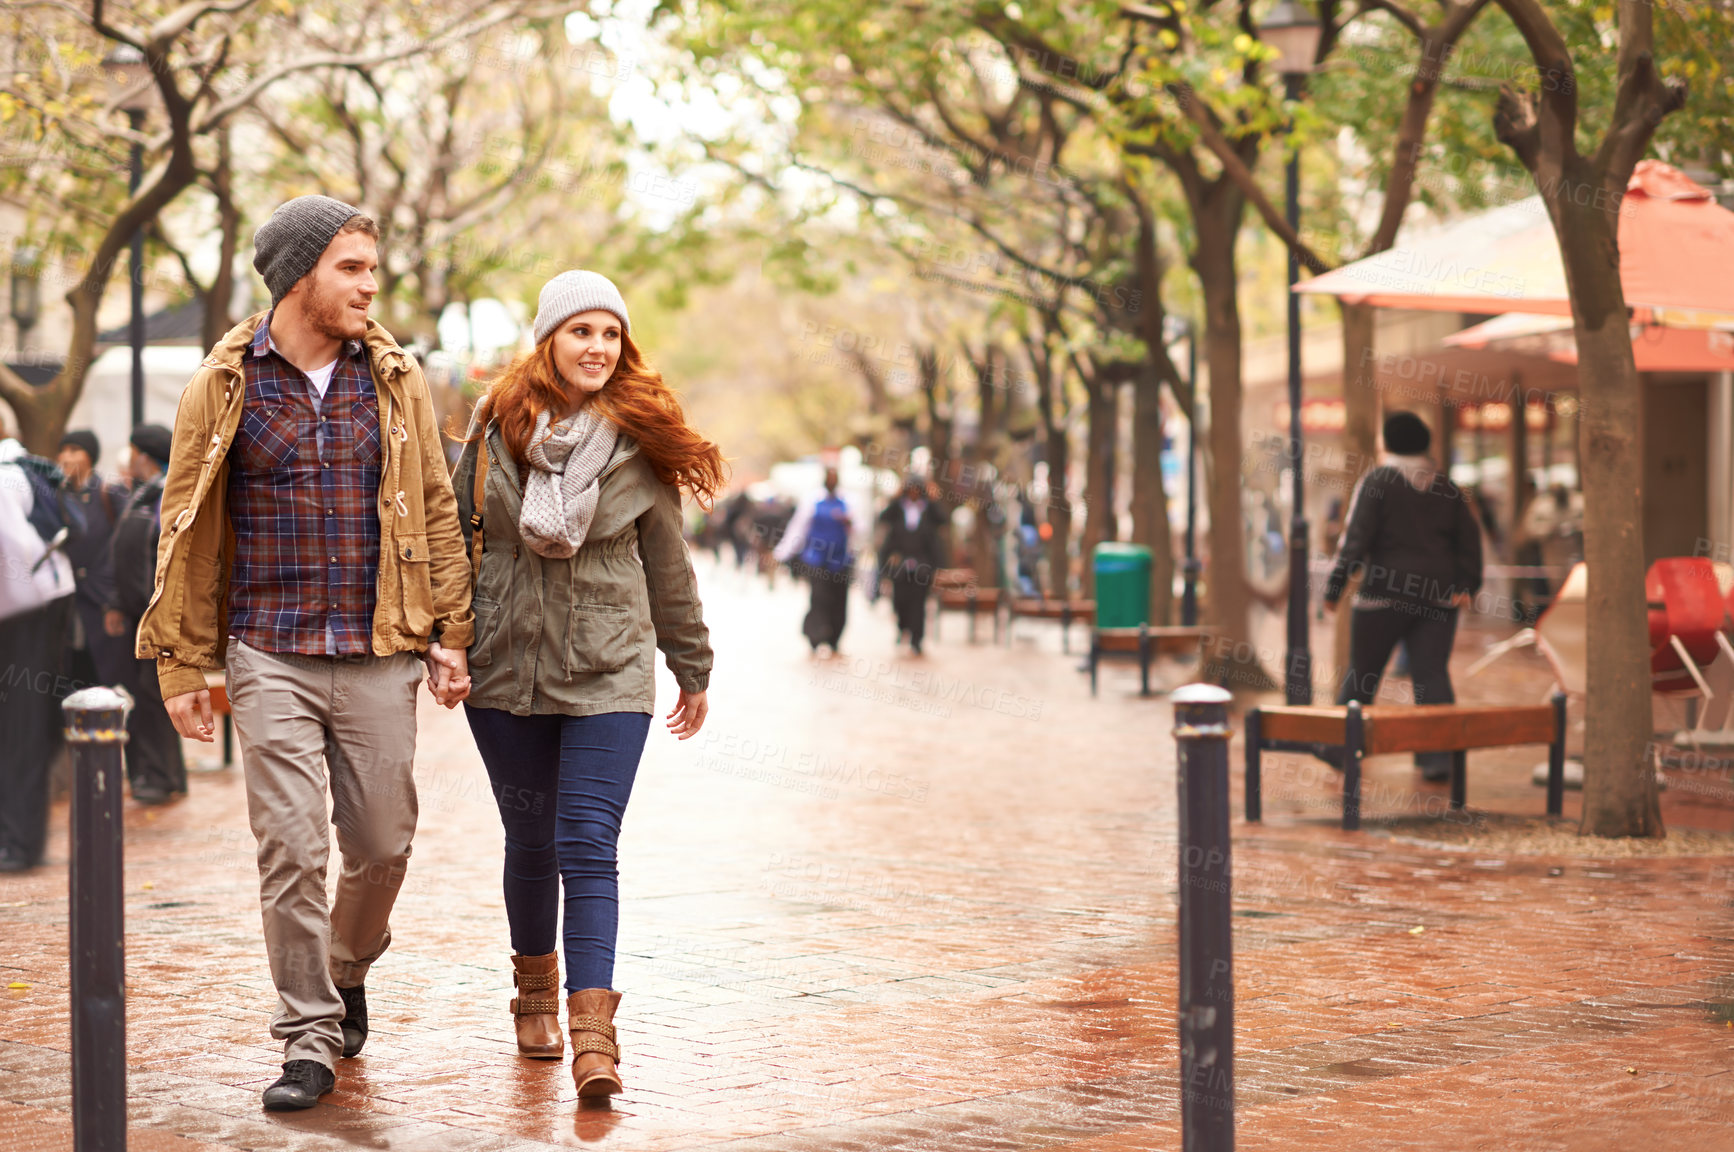 Buy stock photo Shot of a happy young couple walking through an urban area together